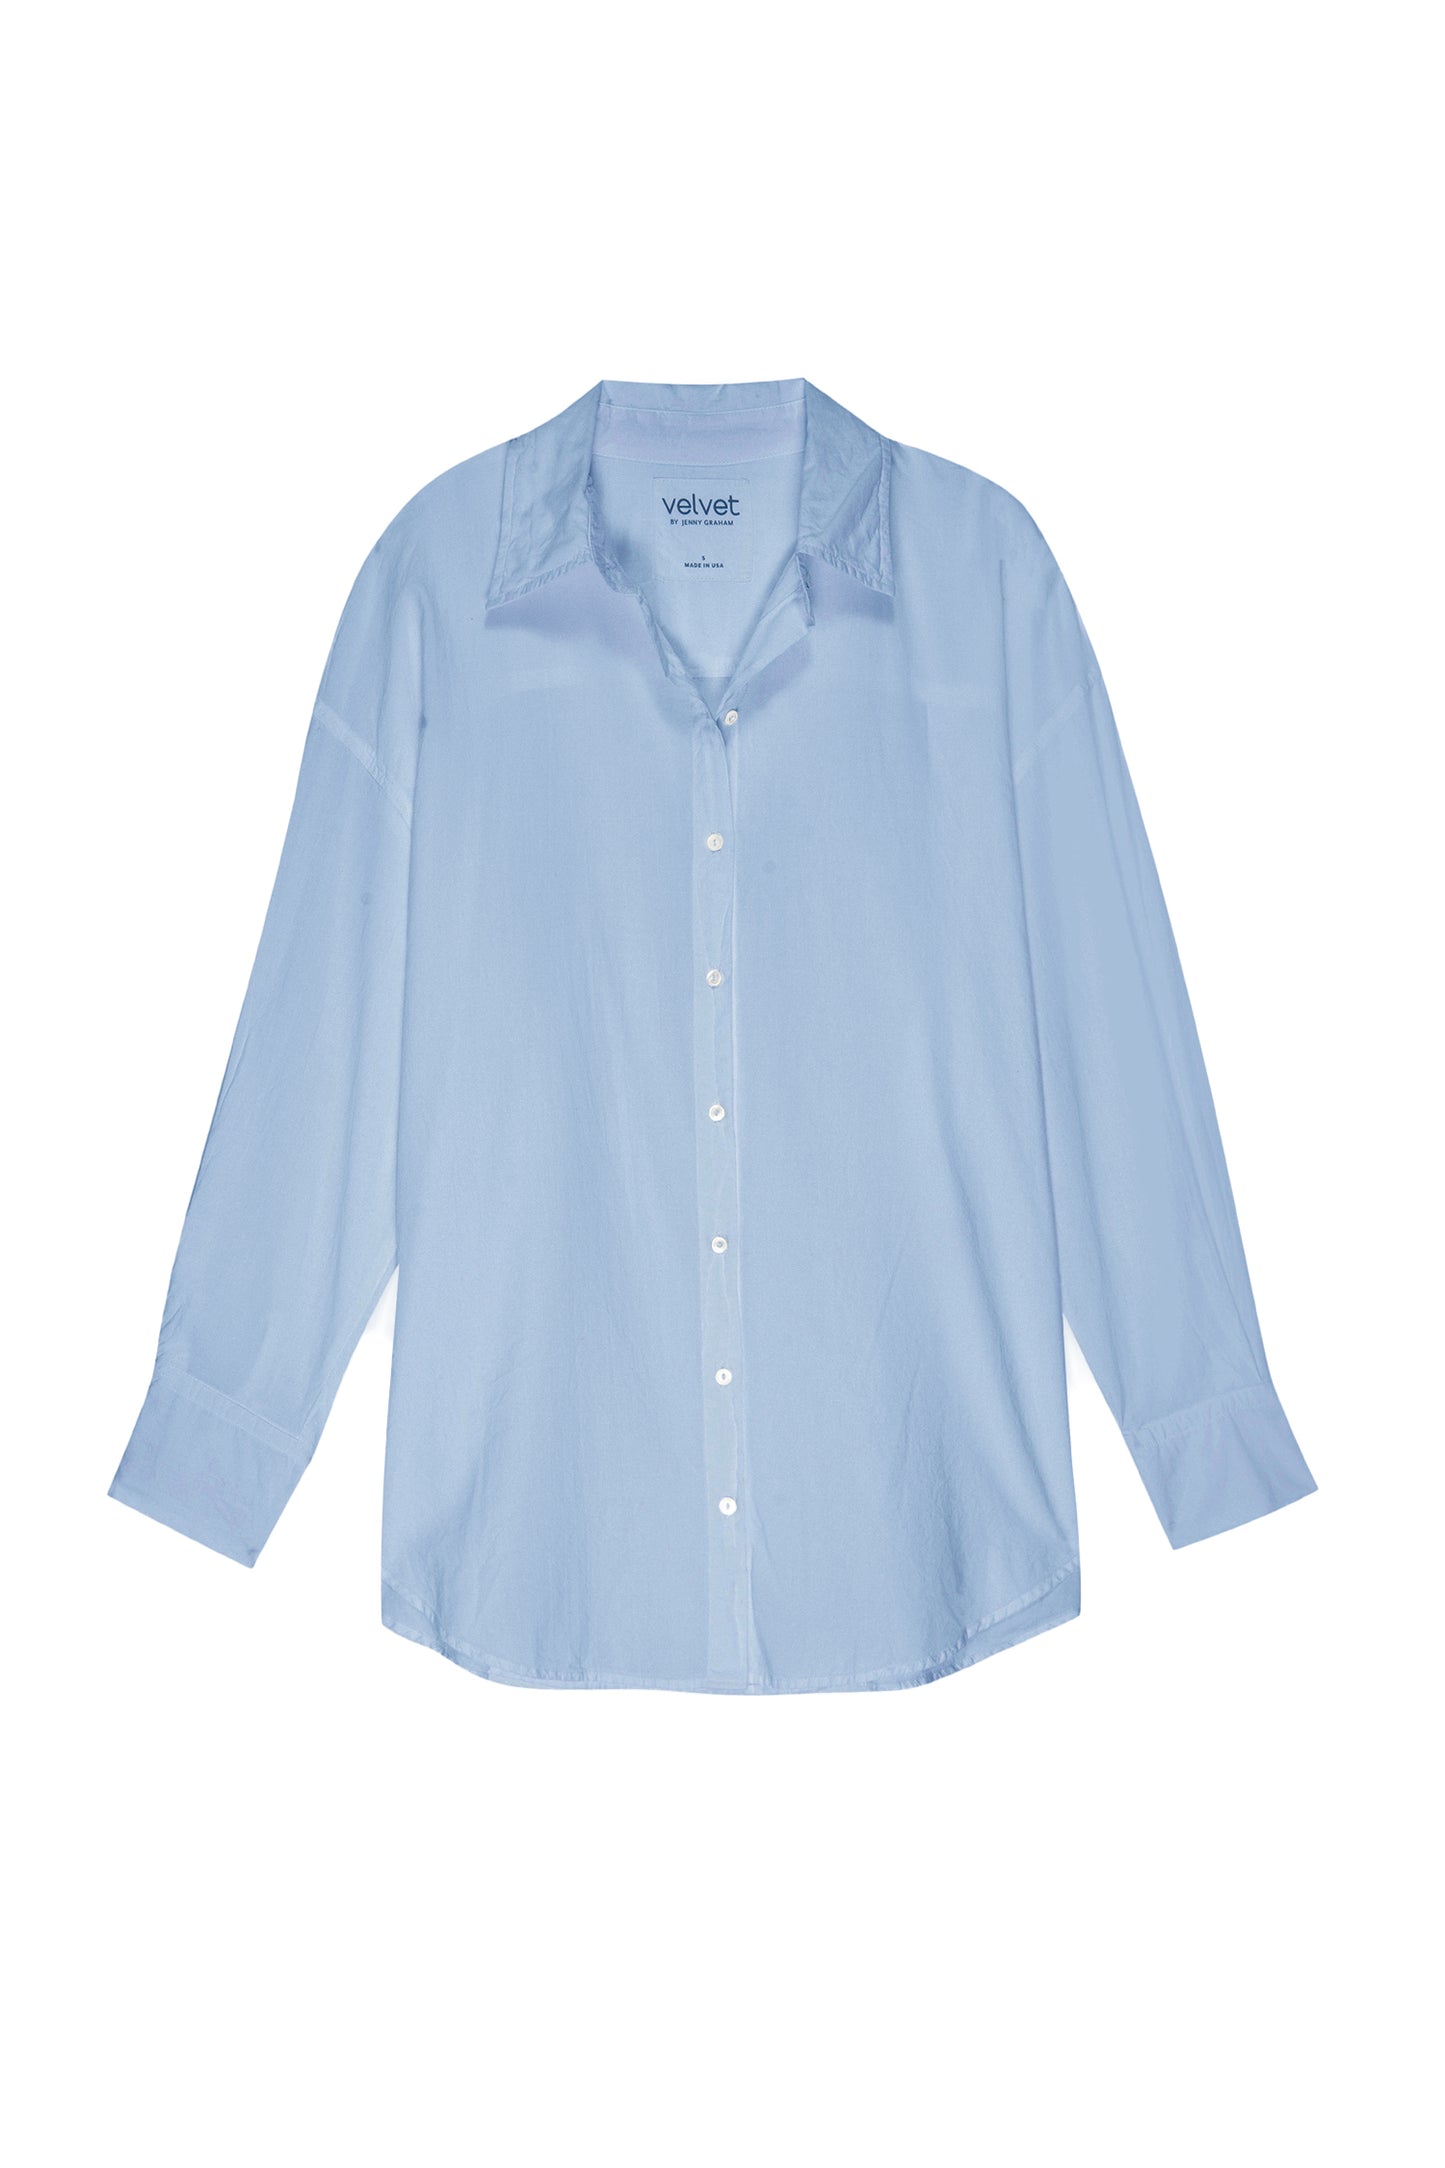 a Velvet by Jenny Graham REDONDO BUTTON-UP SHIRT with buttons down the front.-26293136294081